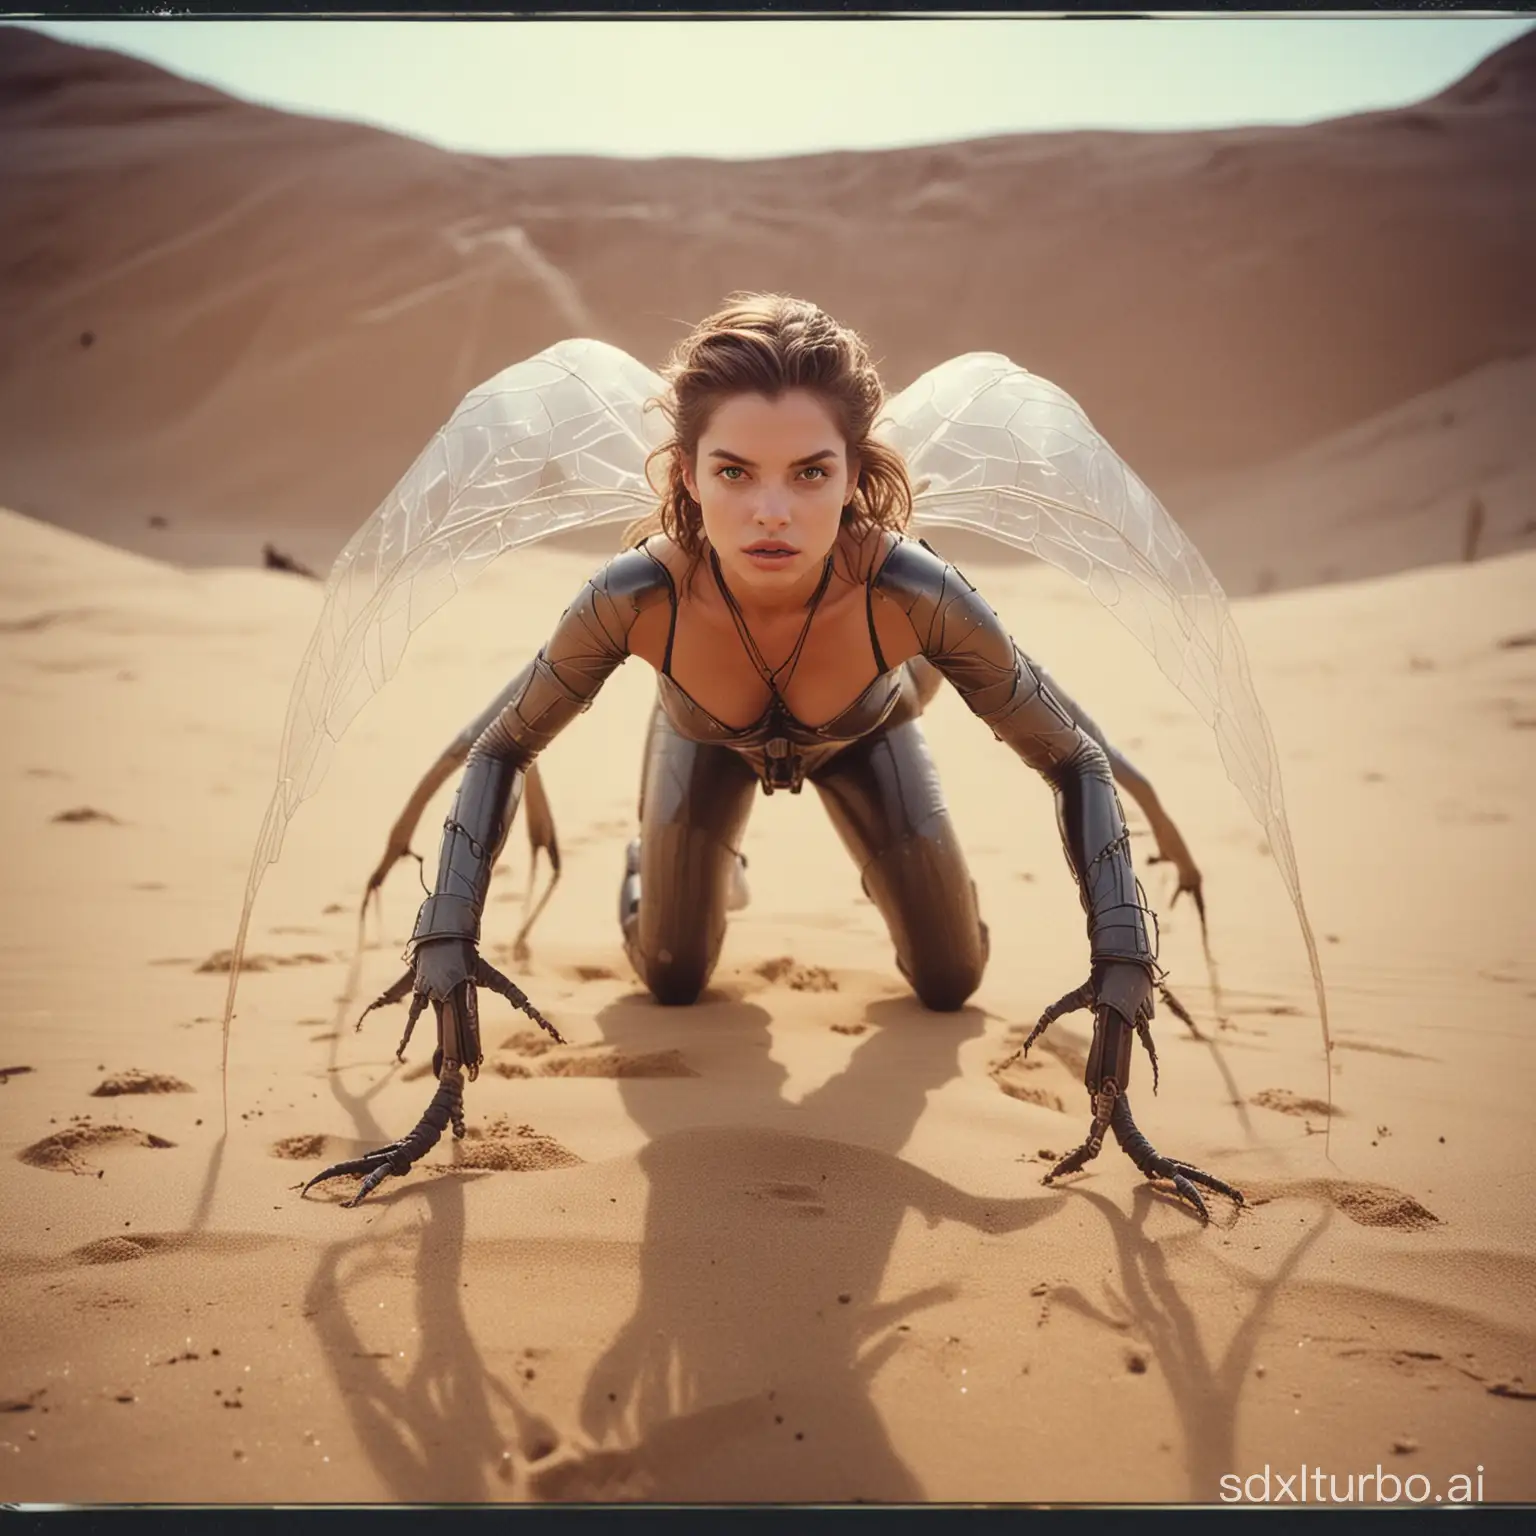 a polaroid picture of a insect woman, a polaroid photo, inspired by David LaChapelle, in an arena in dune 2021, portrait of Barbara Palvin, crawling towards the camera, full frontal shot, as a mystical valkyrie, squad, that looks like a insect, EPK, 90’s photography, Buck Rogers